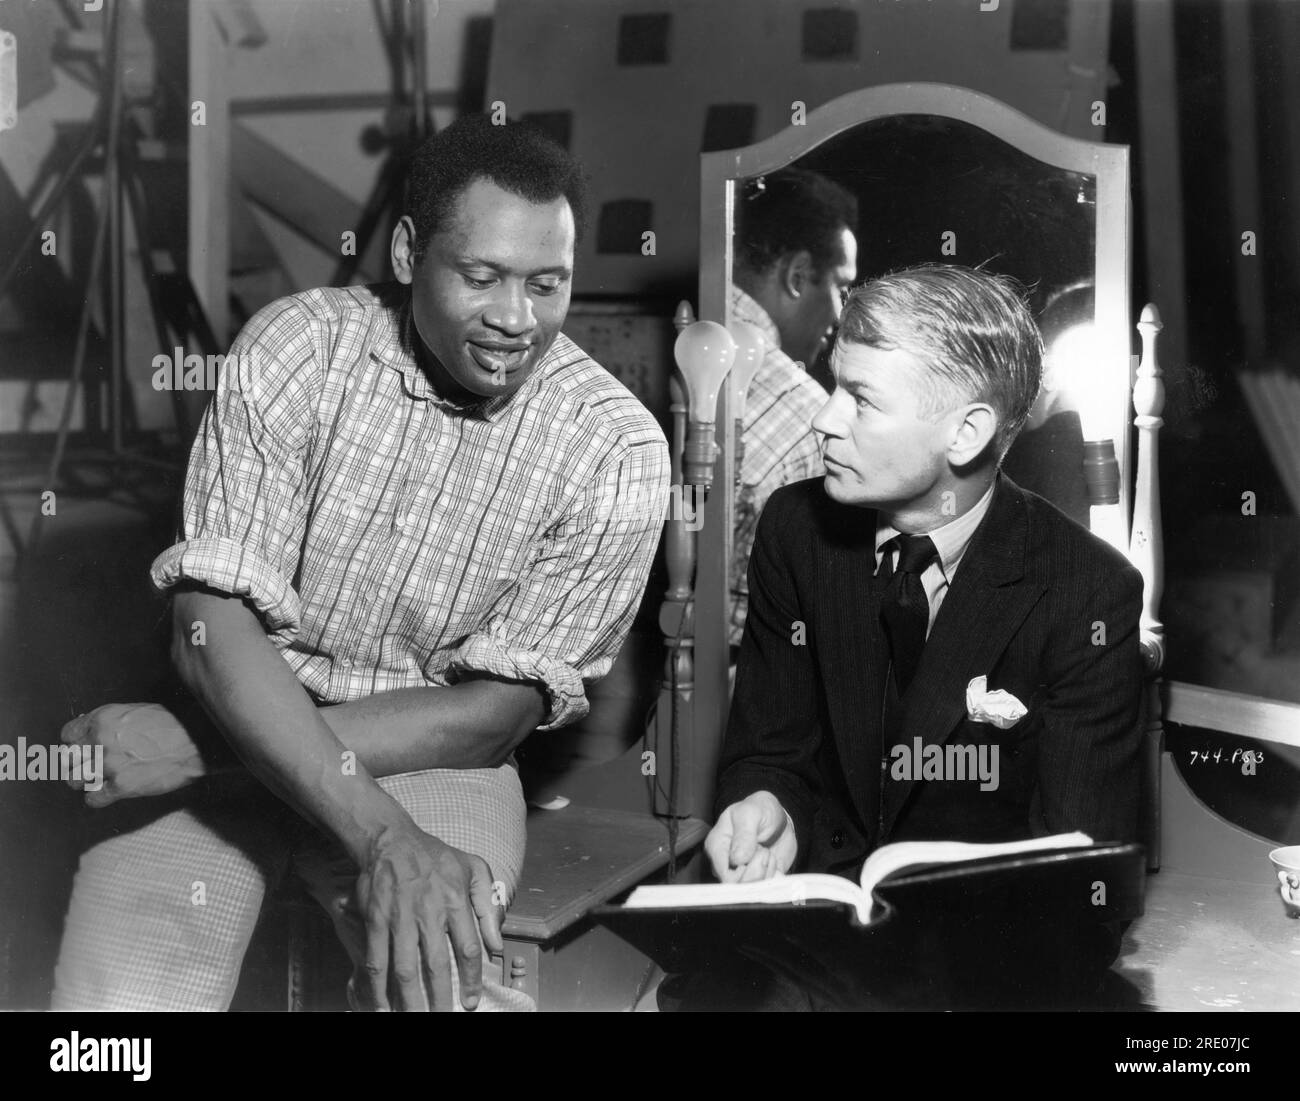 PAUL ROBESON and Director JAMES WHALE on set candid reading script during filming of SHOW BOAT 1936 director JAMES WHALE novel Edna Ferber music Jerome Kern lyrics Oscar Hammerstein II Universal Pictures Stock Photo